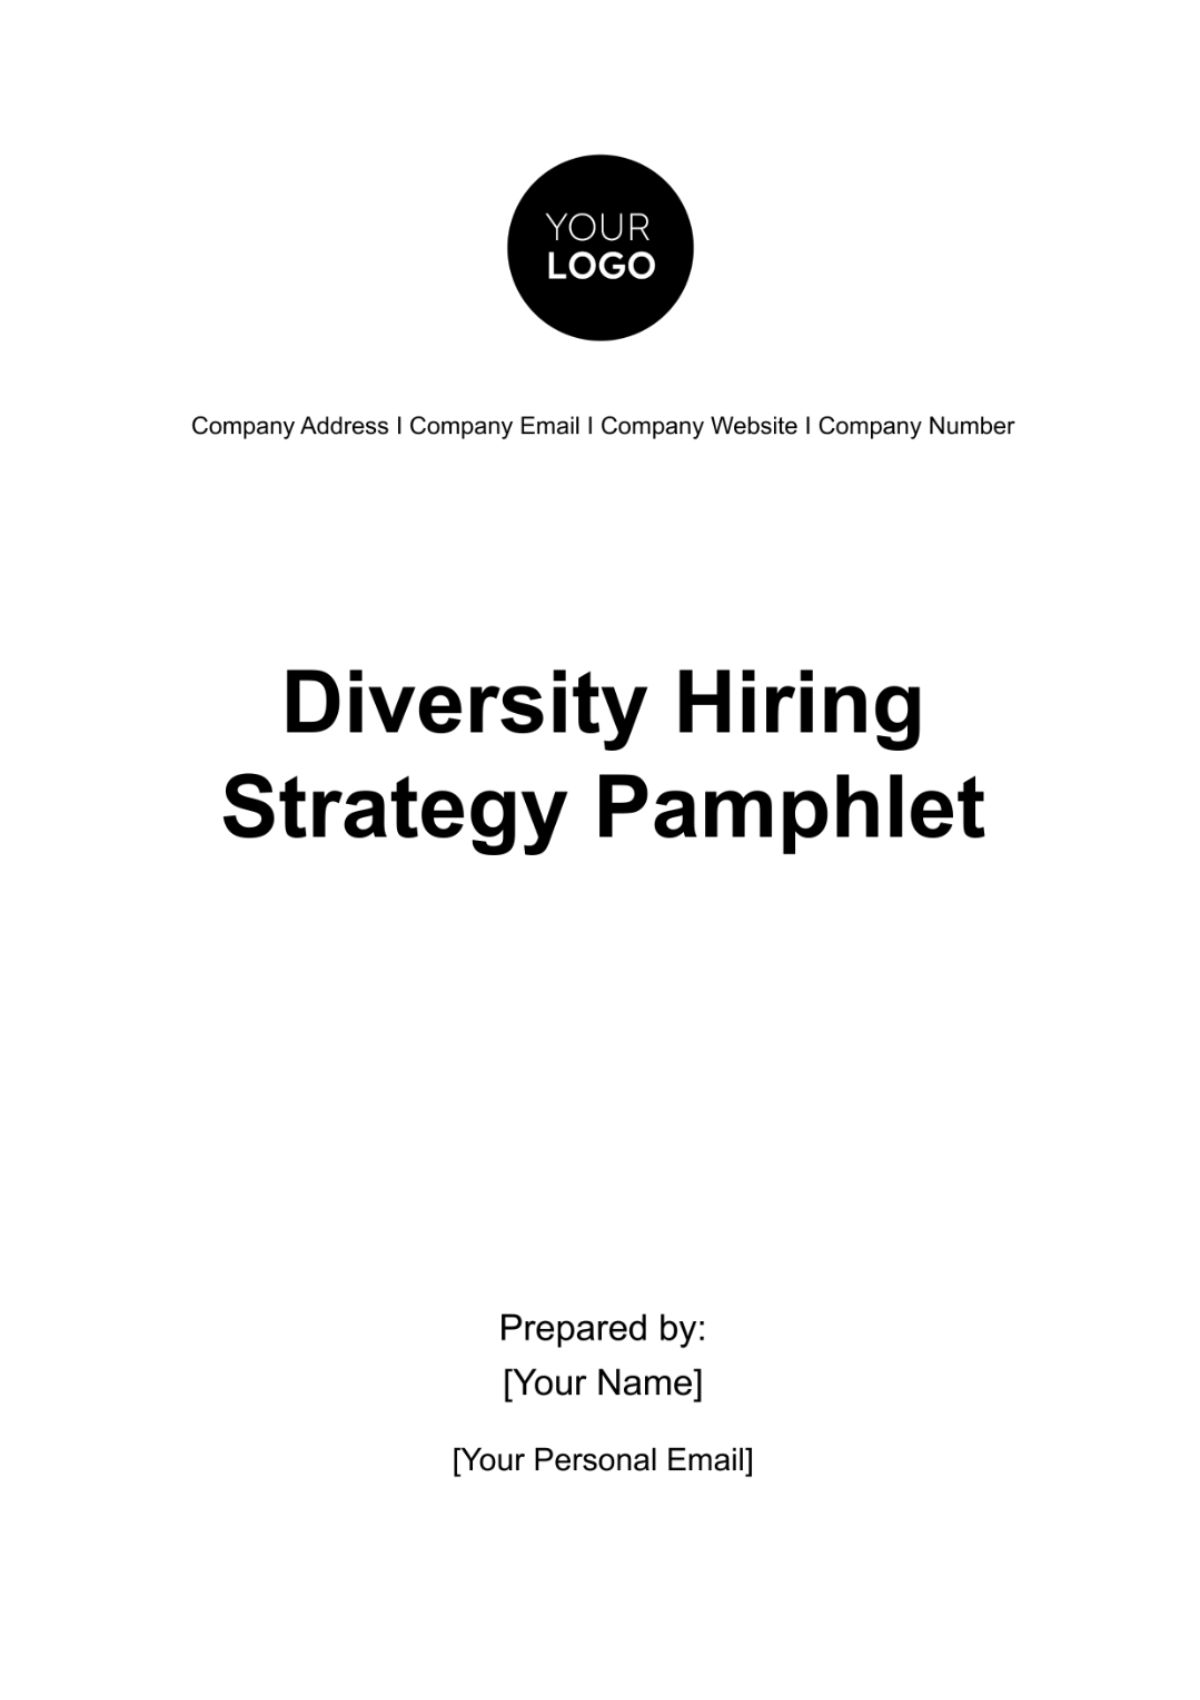 Free Diversity Hiring Strategy Pamphlet HR Template